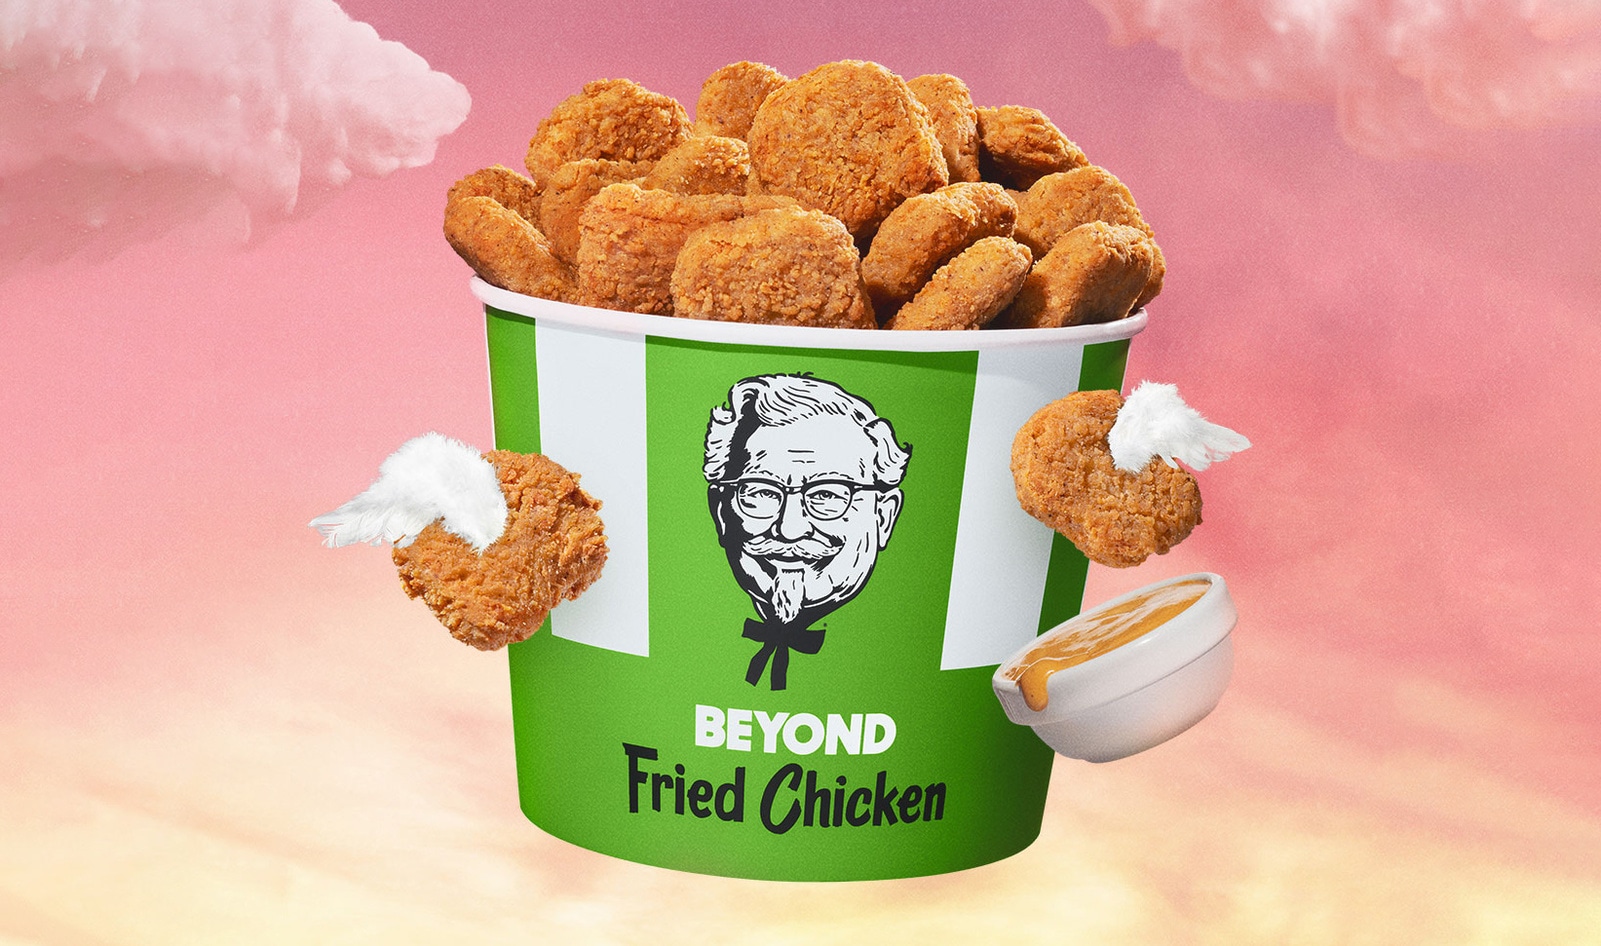 KFC Just Launched Vegan Fried Chicken at More than 4,000 Stores